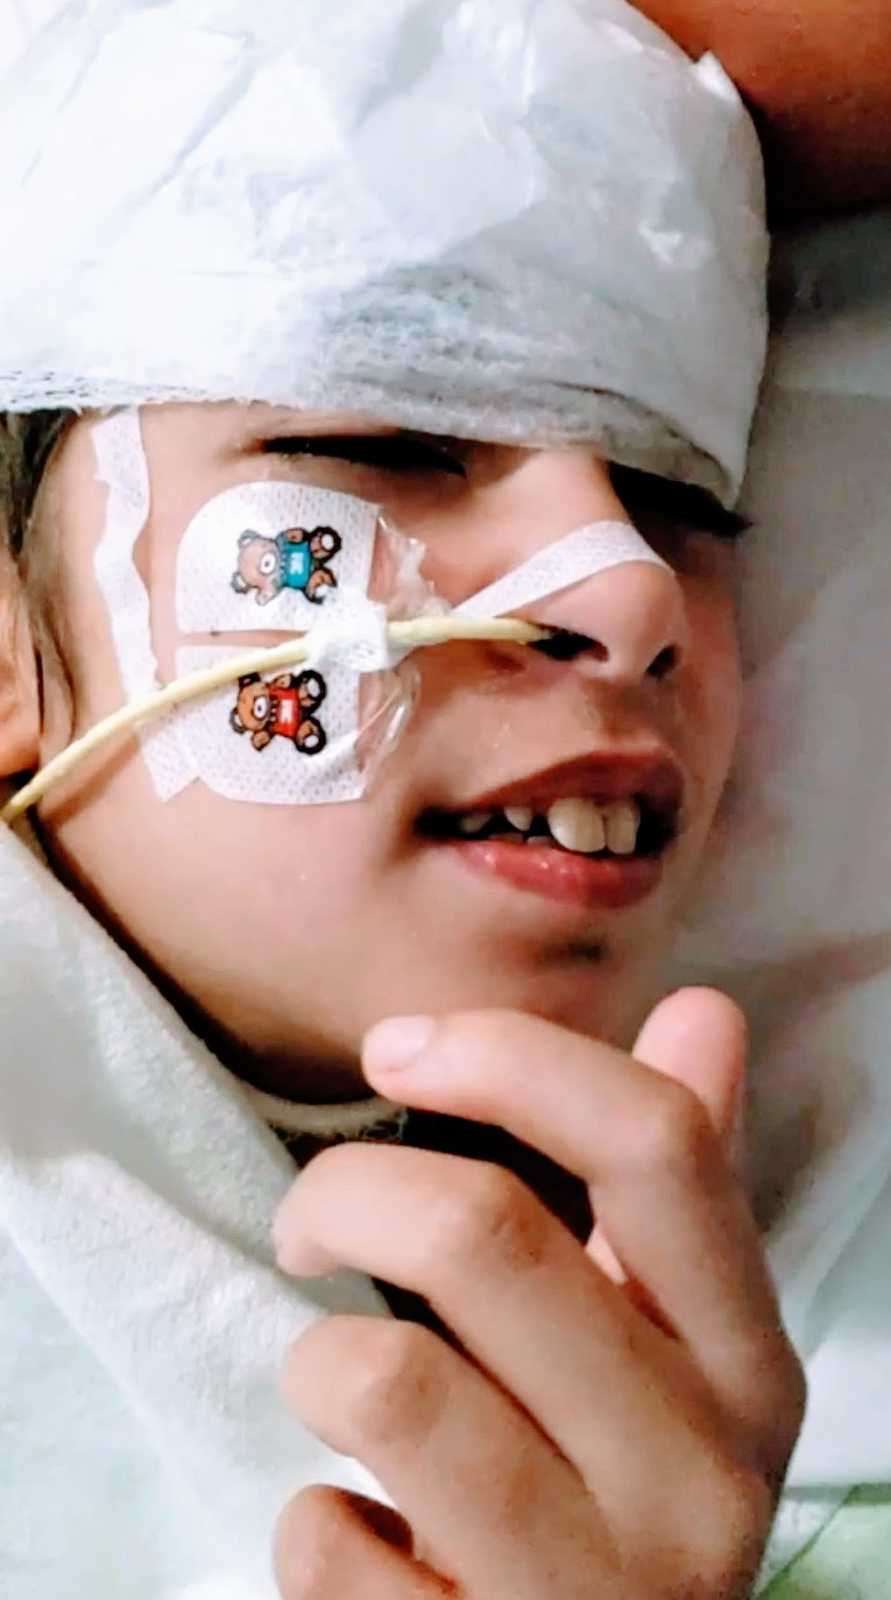 A boy with a rare chromosome disorder lies in a hospital bed hooked up to wires